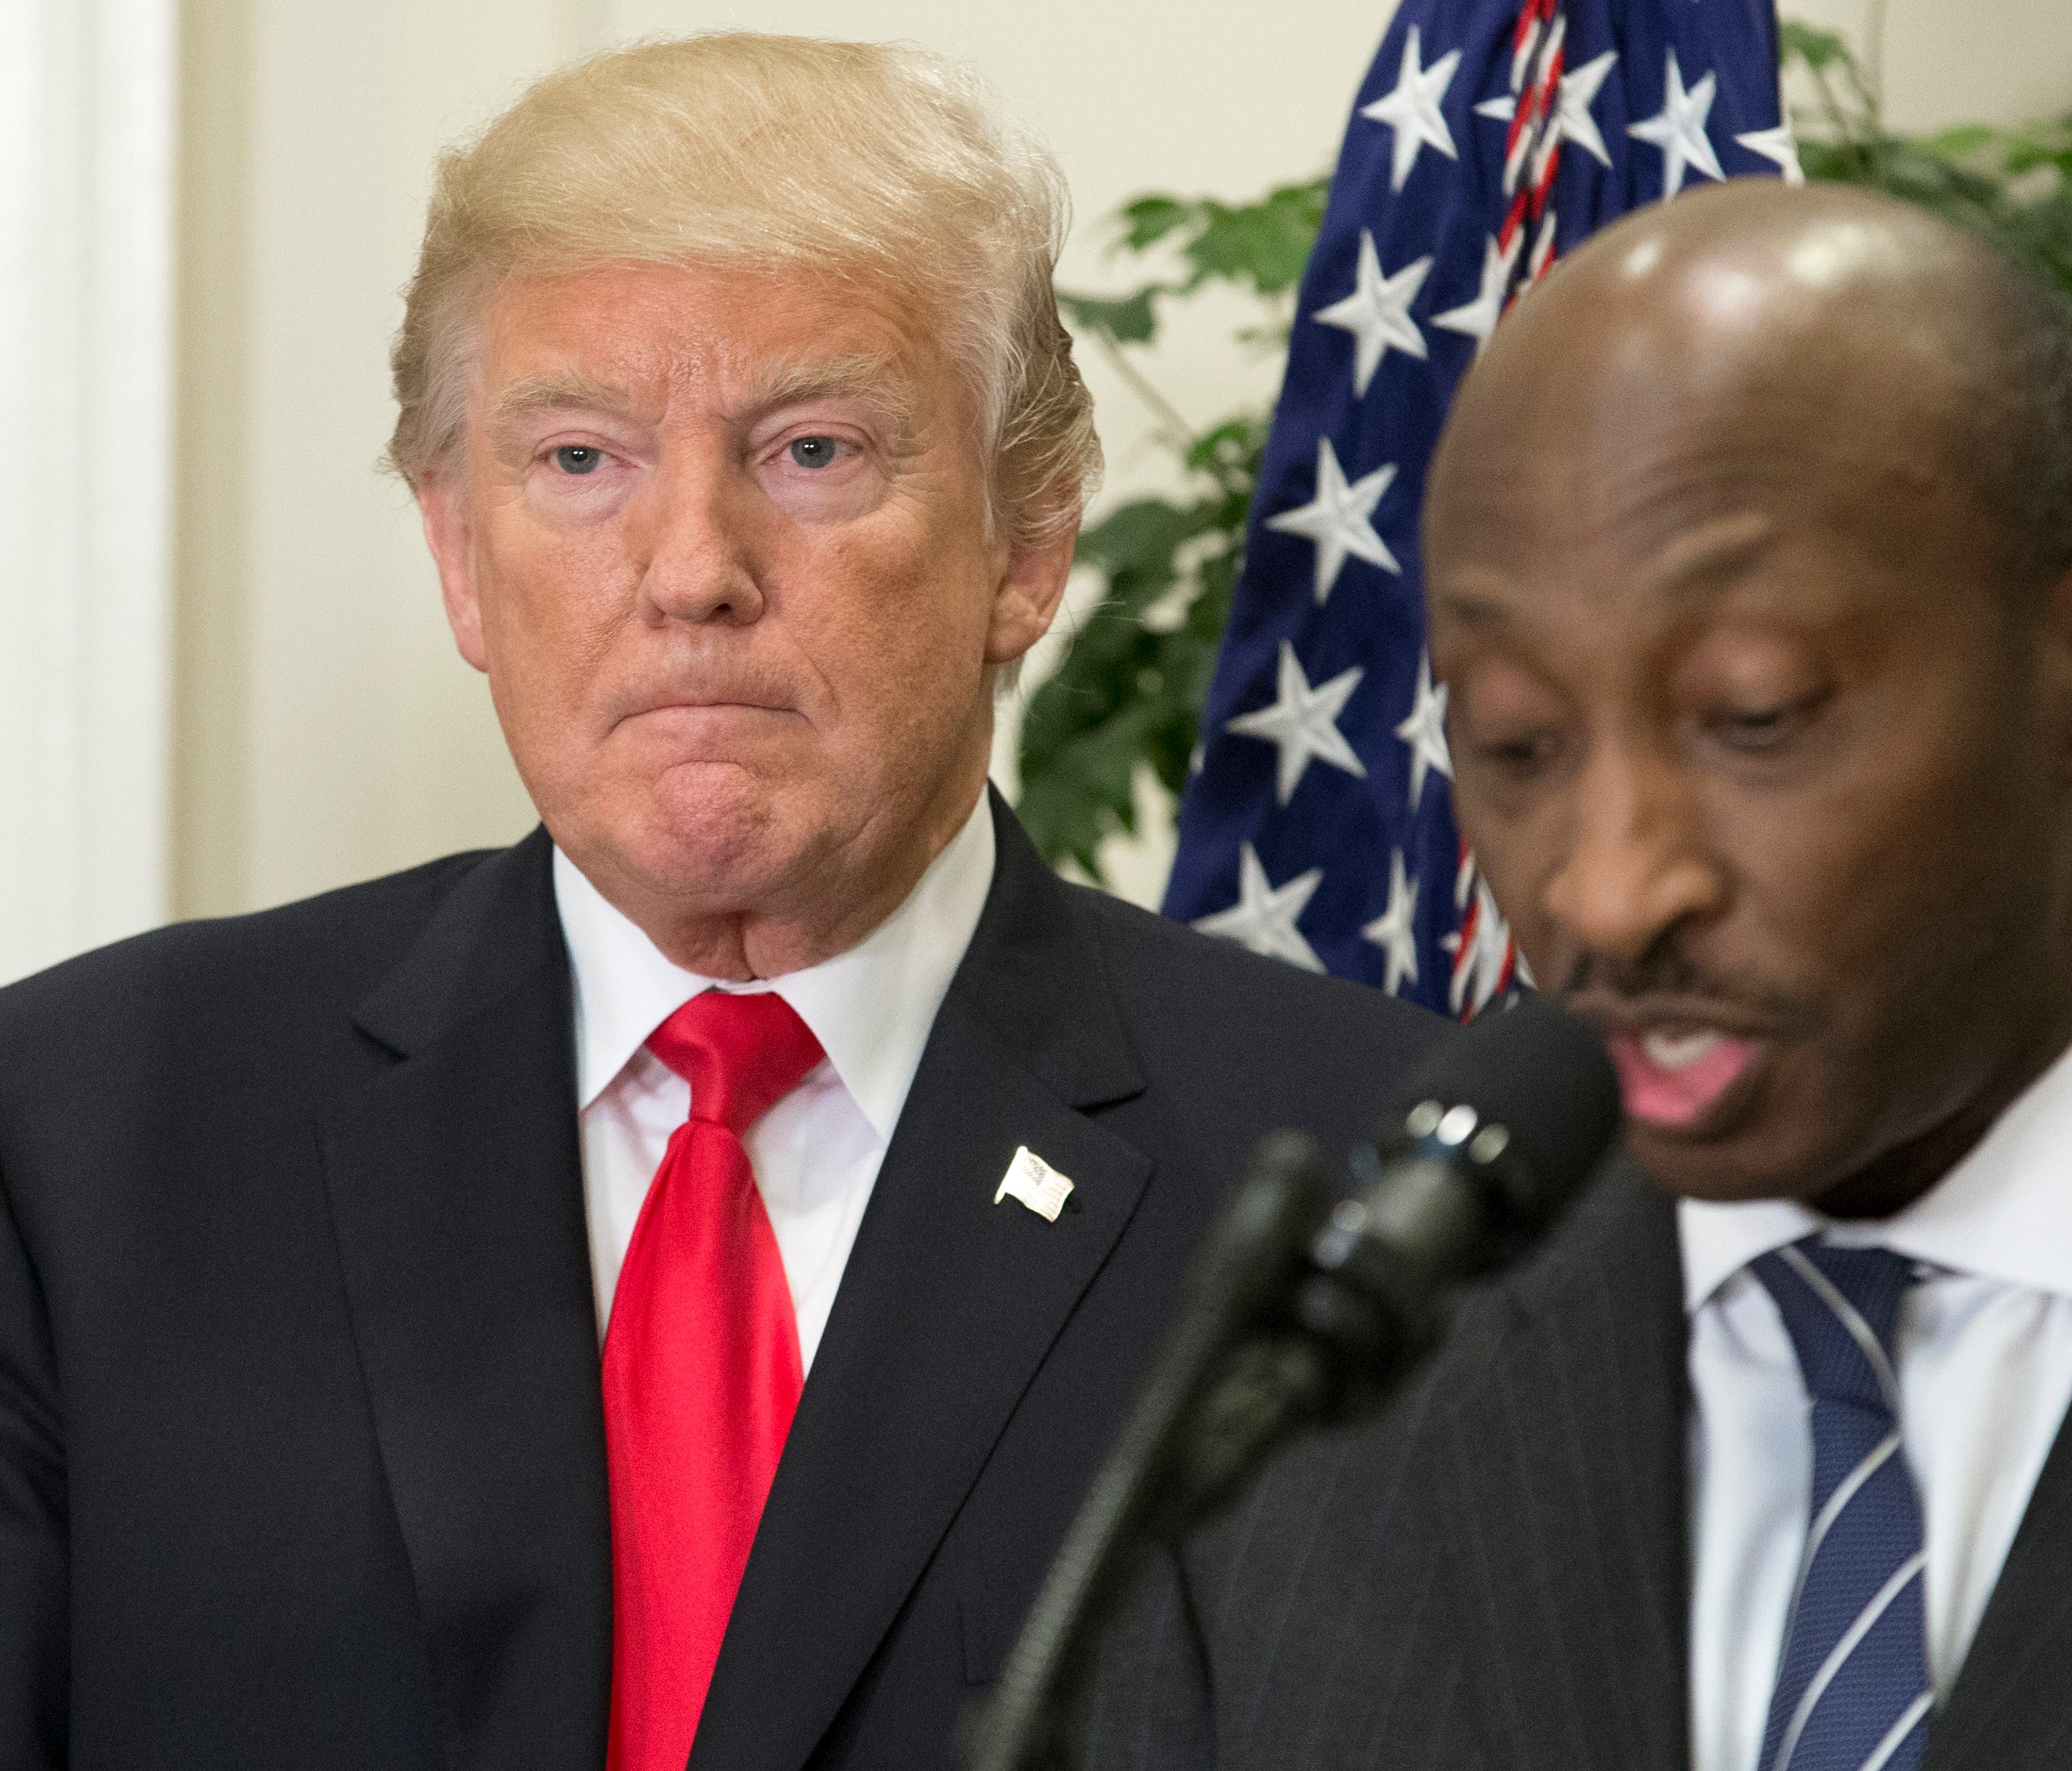 File photo shows President Trump listening as Merck CEO Ken Frazier speaks during the July 2017 White House announcement of a pharmaceutical glass packaging initiative.